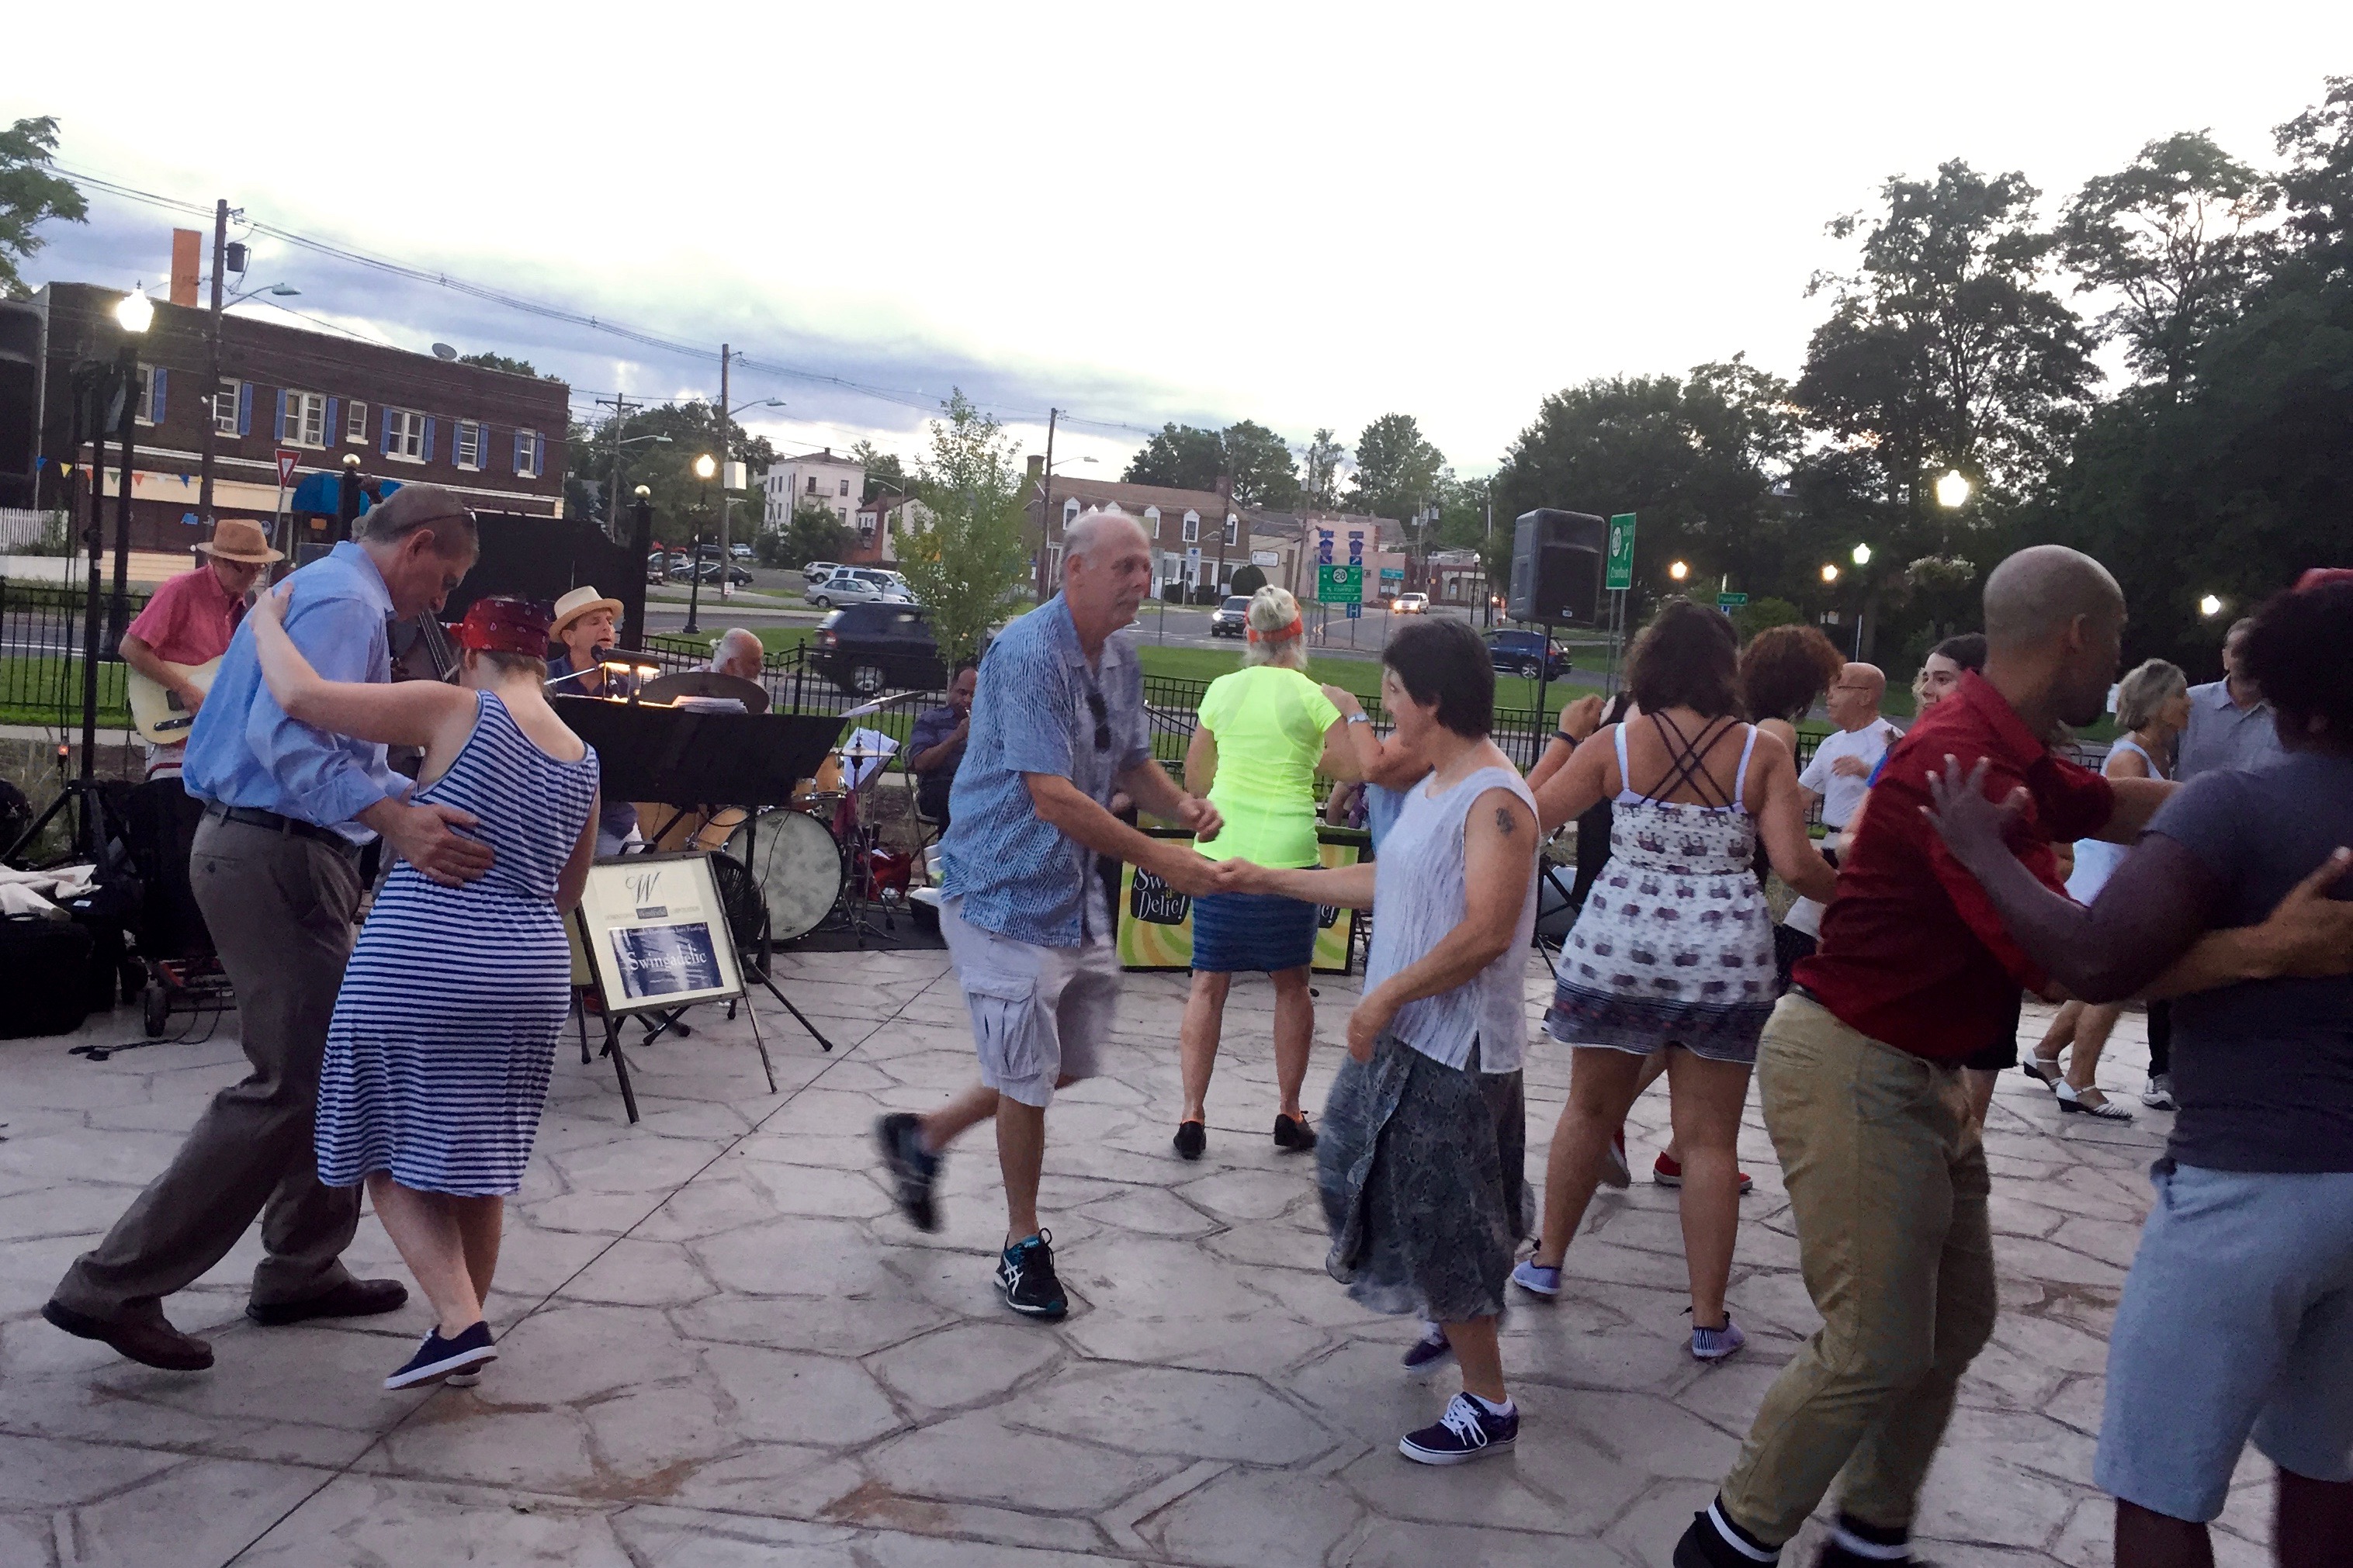 Swingadelic entertains the crowds on July 26.